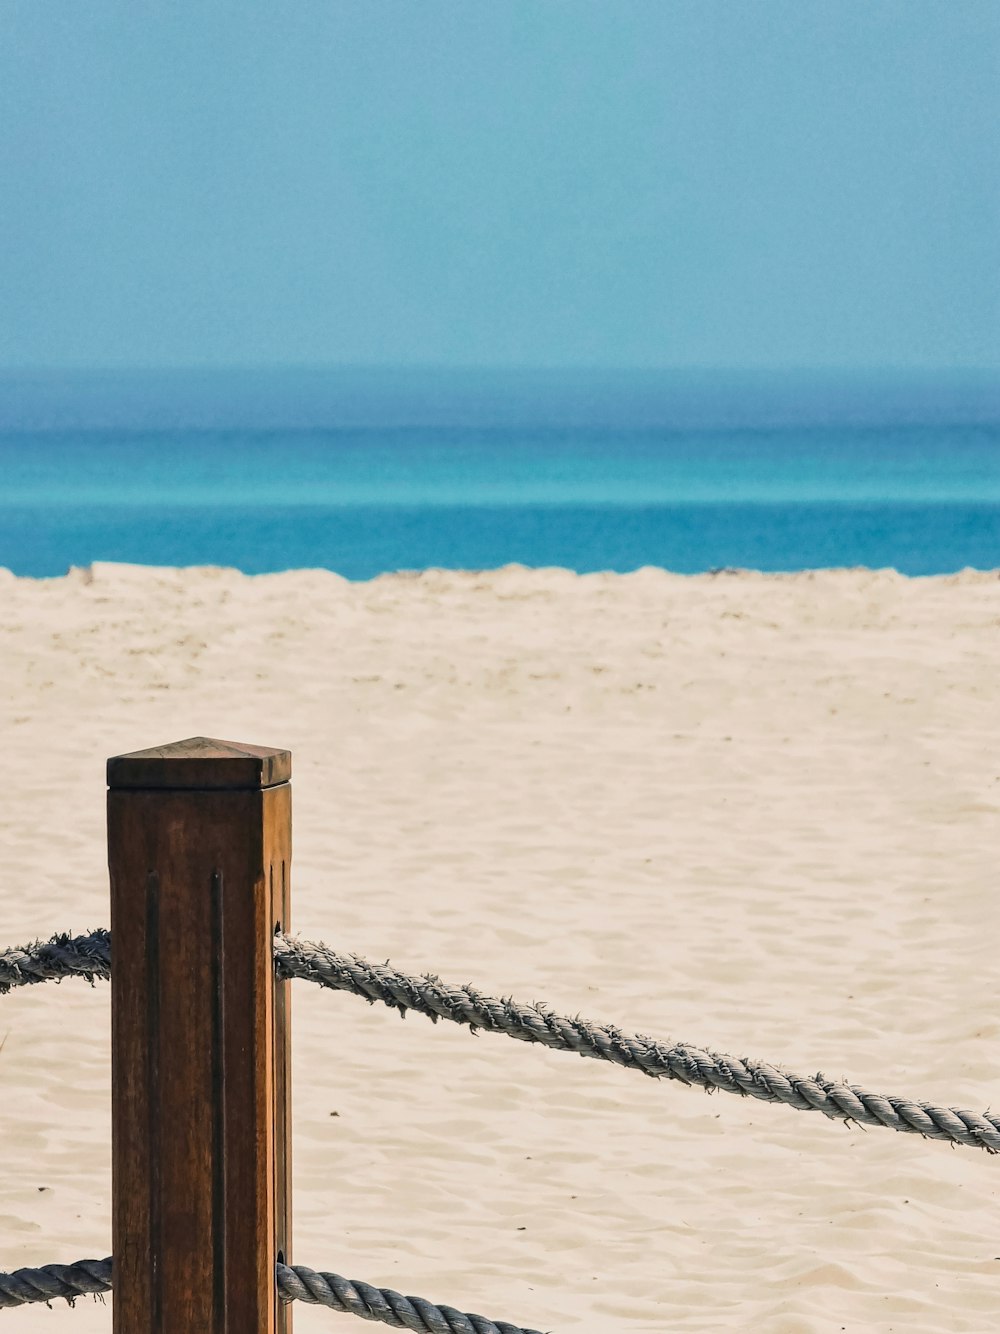 A wooden post on a beach next to a rope fence photo – Free Soul